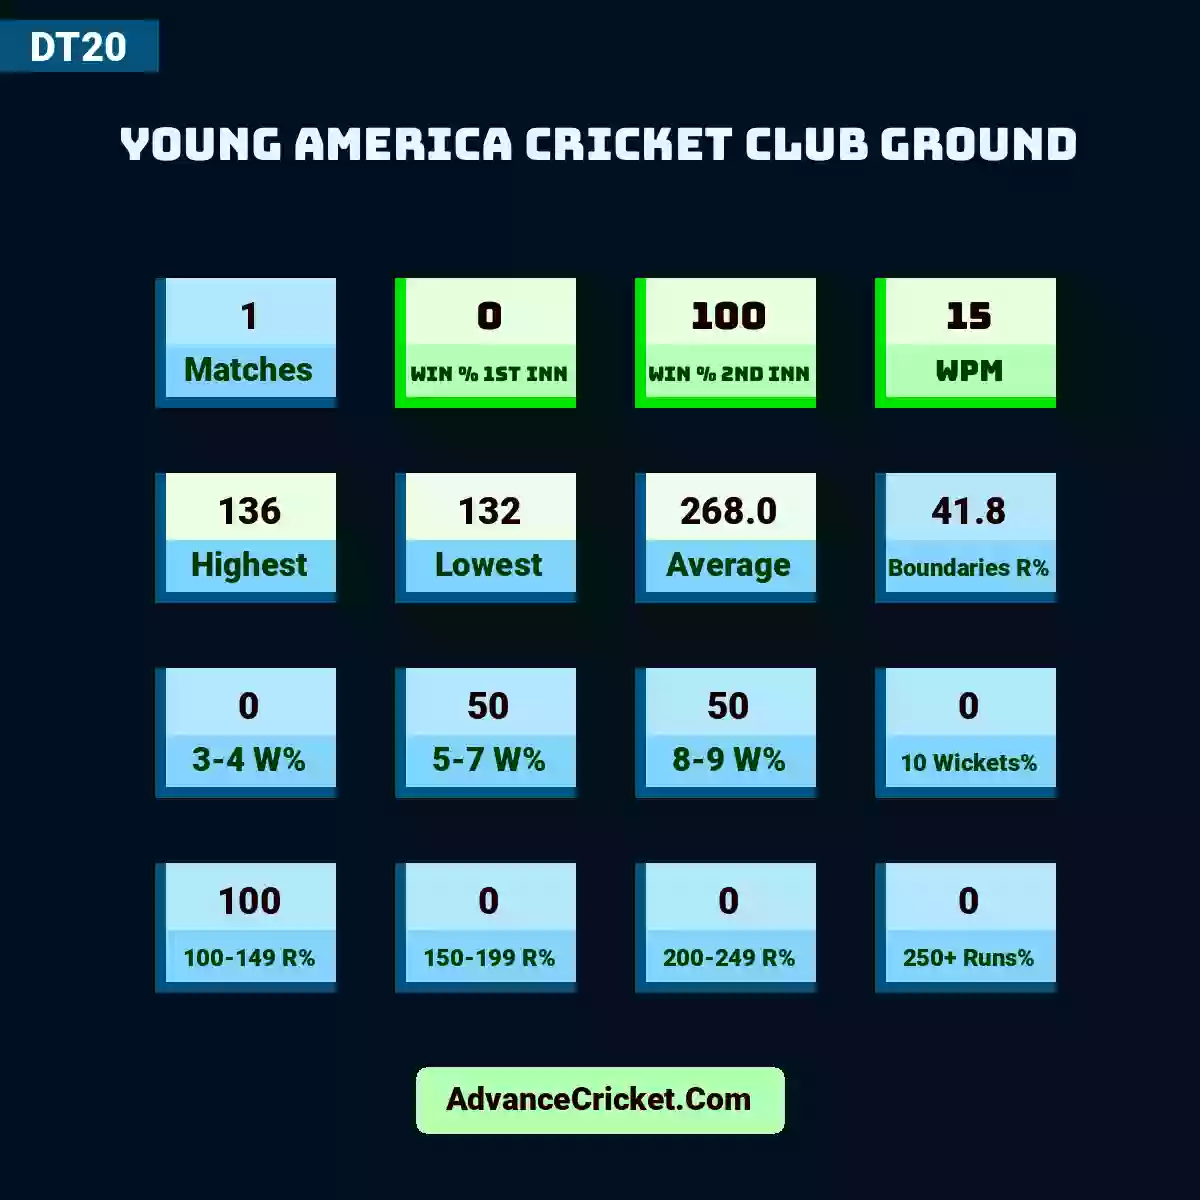 Image showing Young America Cricket Club Ground with Matches: 1, Win % 1st Inn: 0, Win % 2nd Inn: 100, WPM: 15, Highest: 136, Lowest: 132, Average: 268.0, Boundaries R%: 41.8, 3-4 W%: 0, 5-7 W%: 50, 8-9 W%: 50, 10 Wickets%: 0, 100-149 R%: 100, 150-199 R%: 0, 200-249 R%: 0, 250+ Runs%: 0.